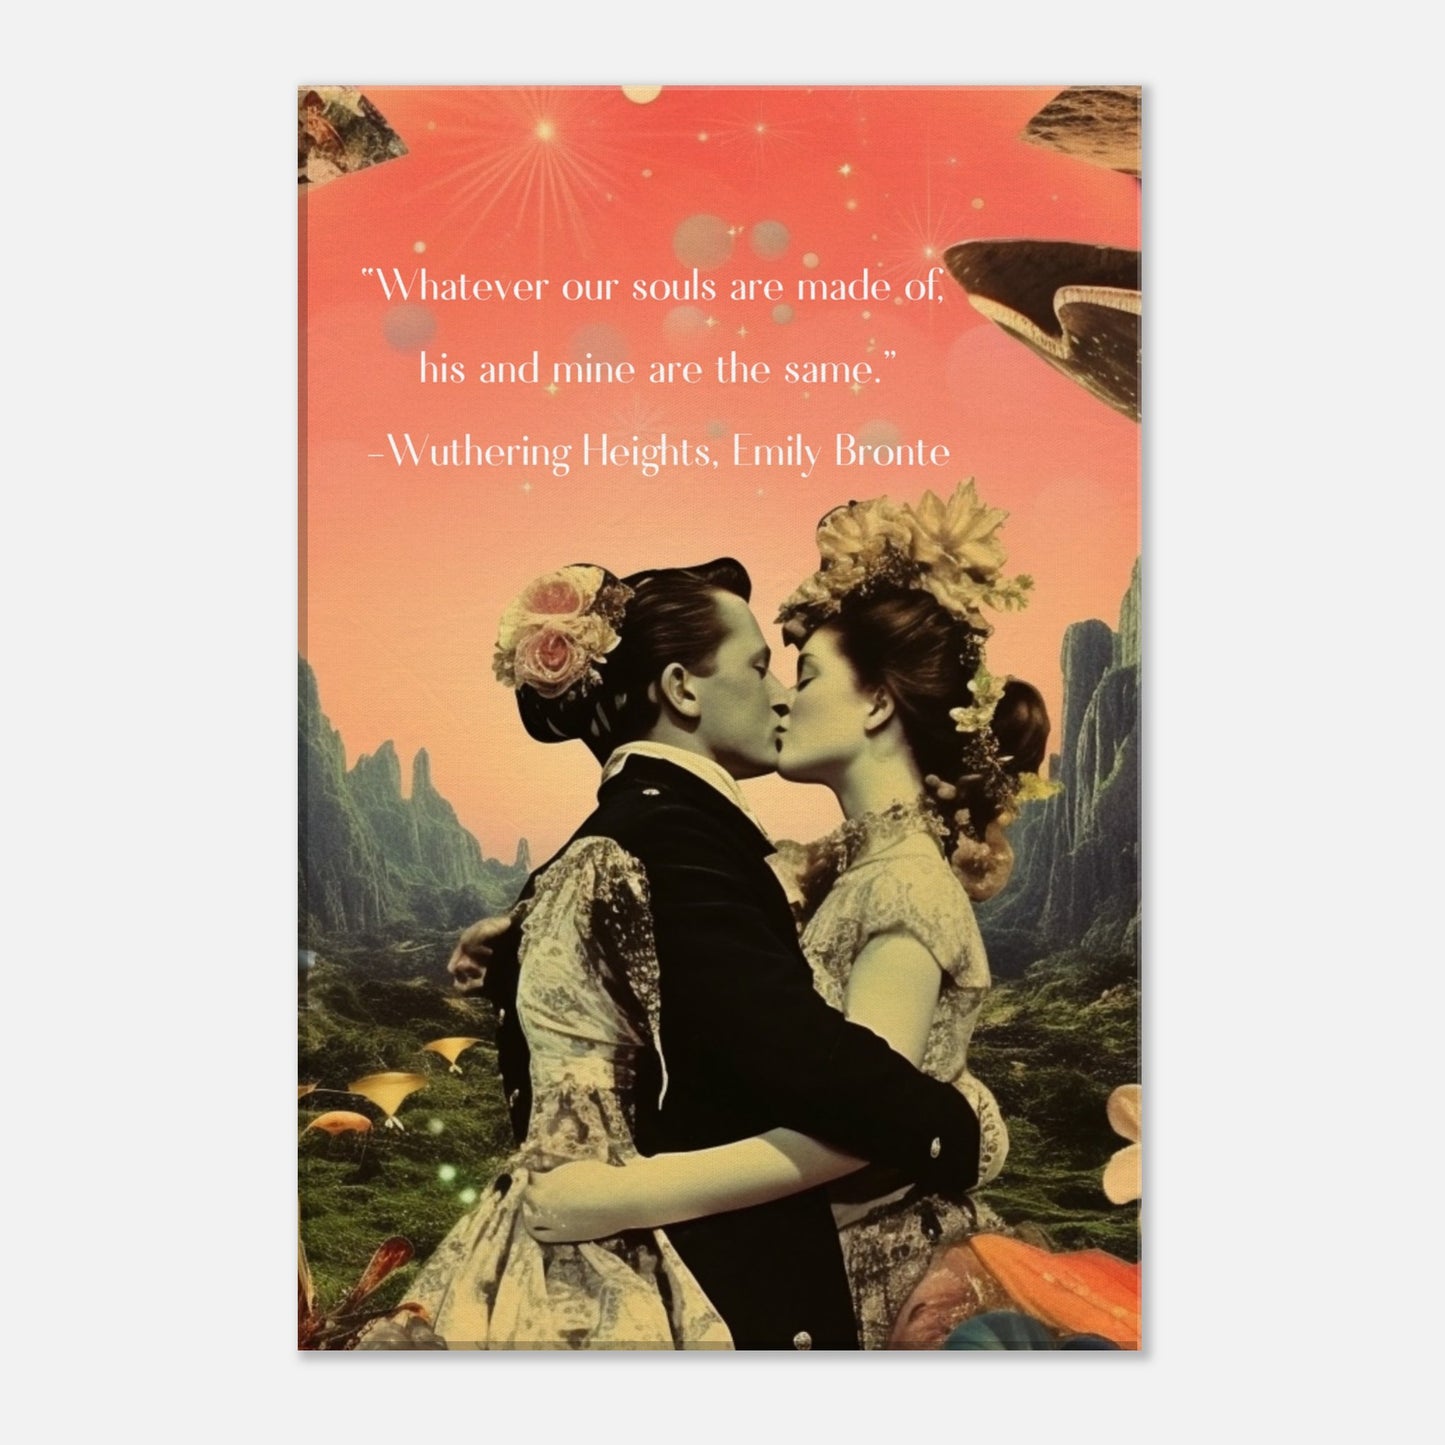 'Whatever our souls' from Wuthering Heights by Emily Bronte, Quote Canvas Art Print